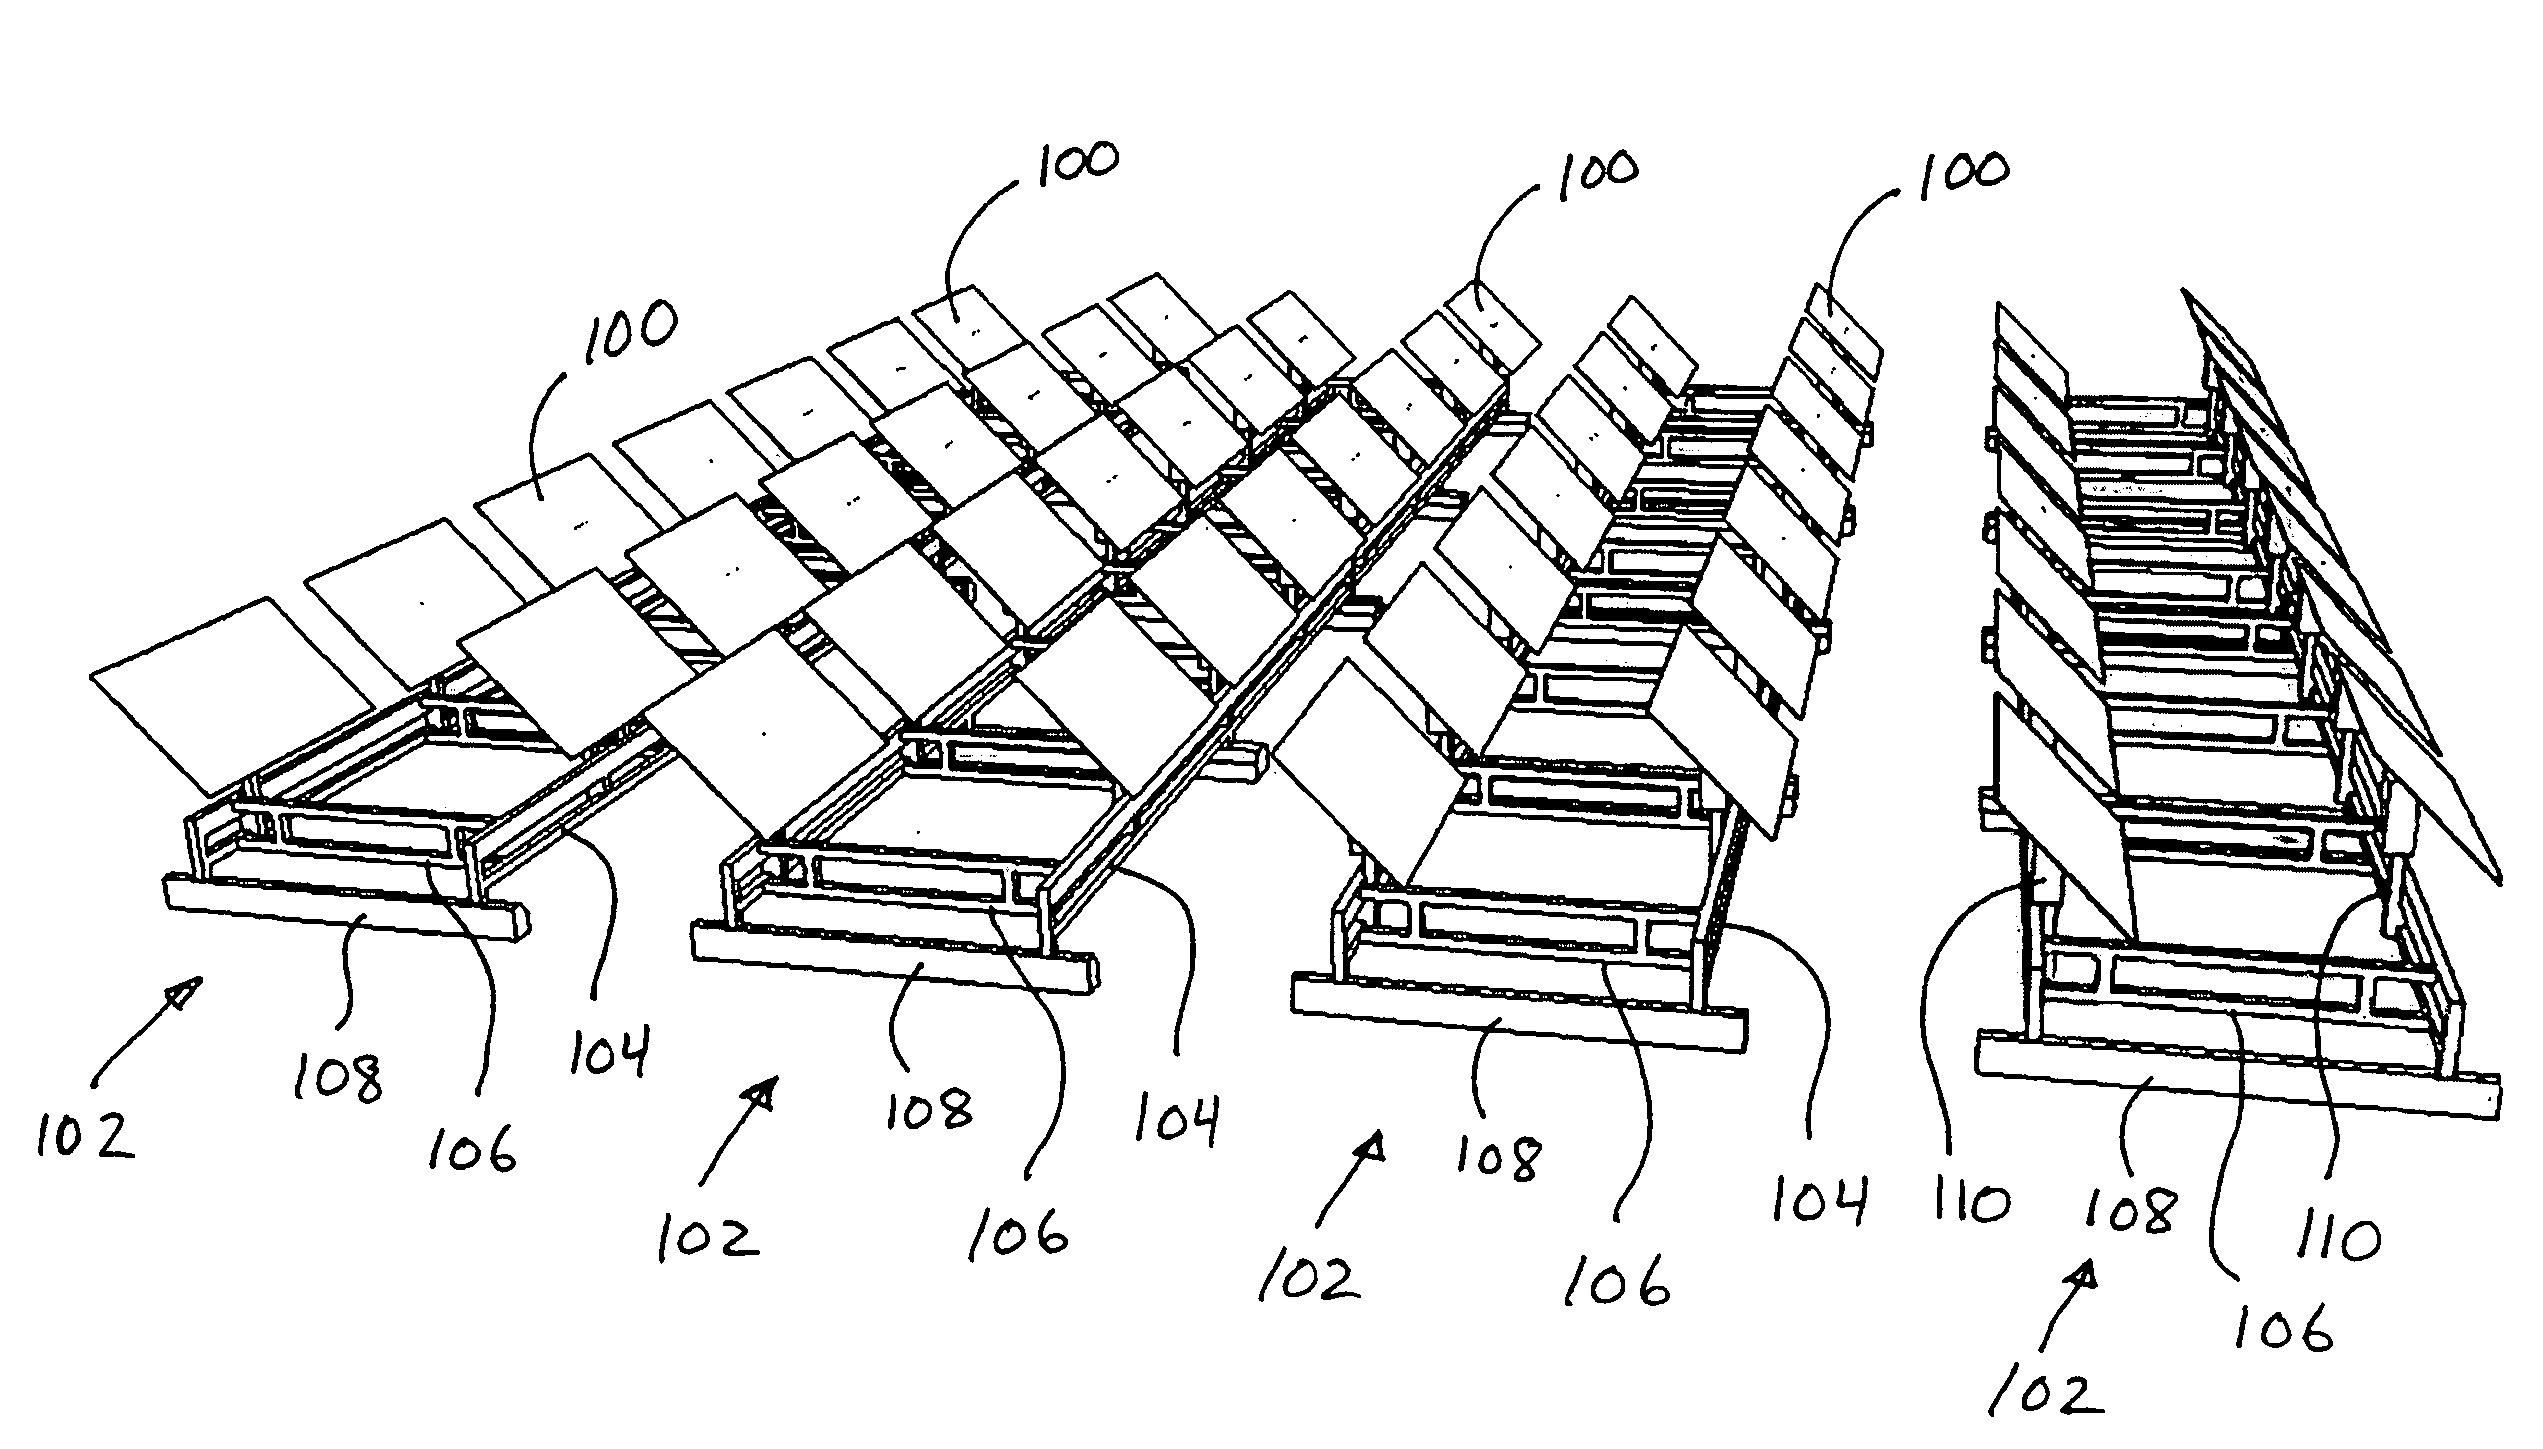 Solar collector system for solar thermal applications